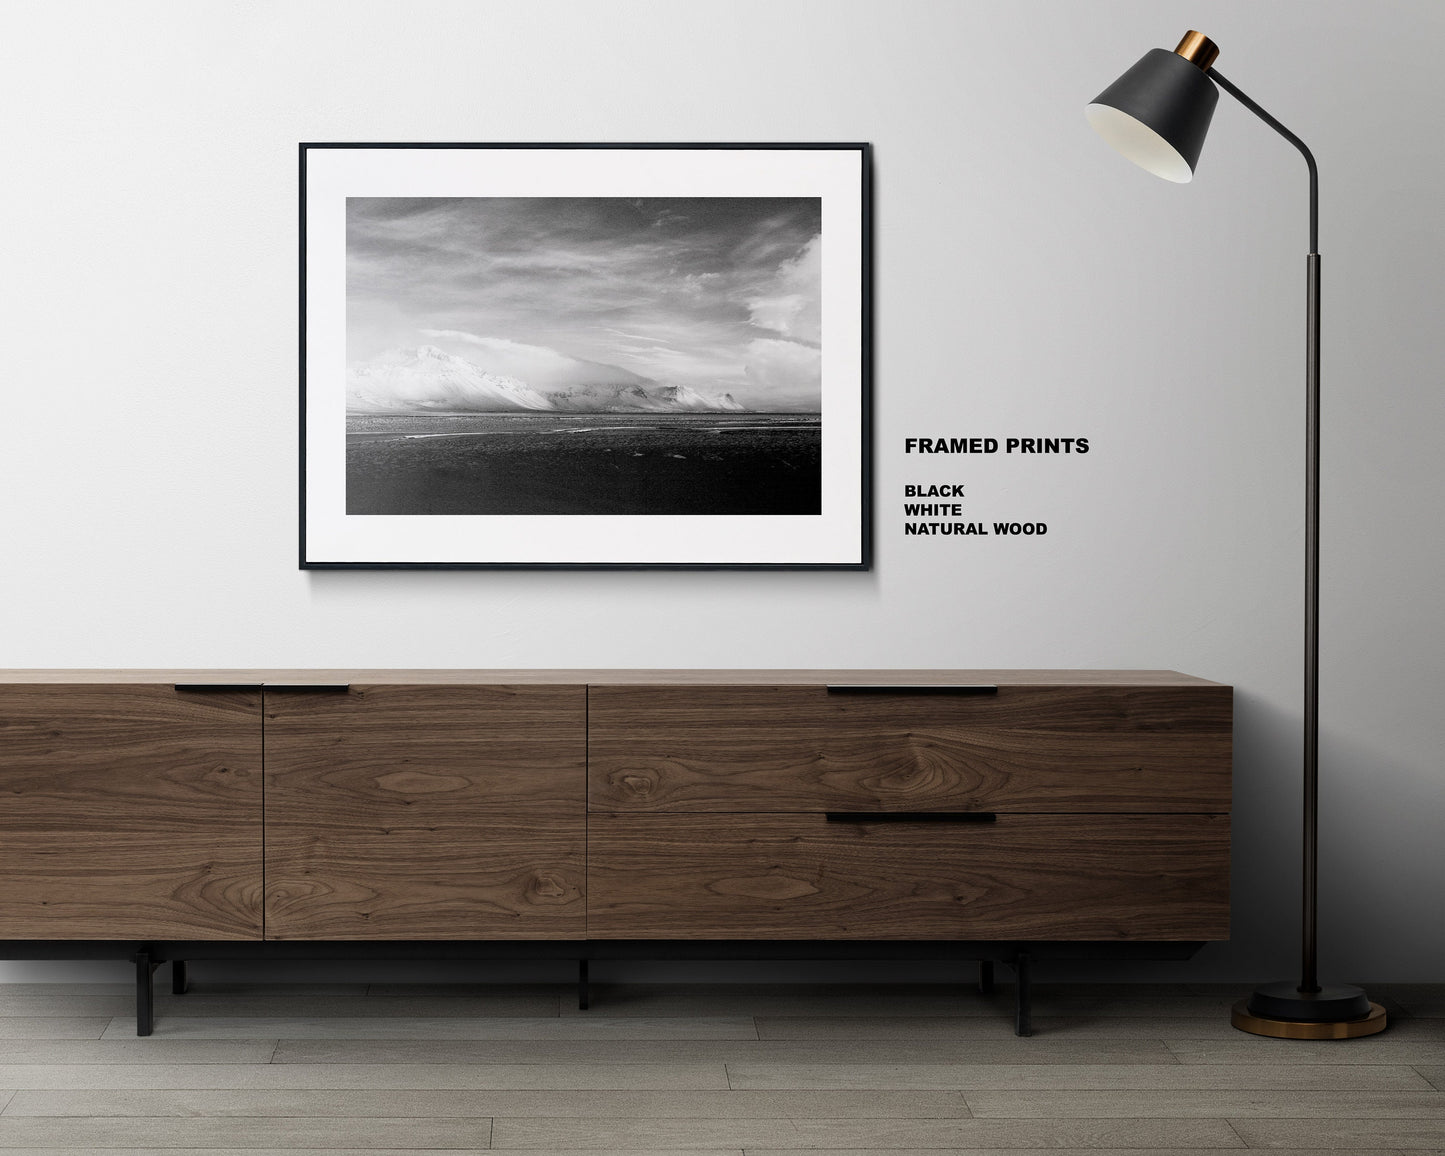 Iceland Mountains - Iceland Photography Print - Iceland Wall Art - Iceland Poster - Black and White Photography - Landscape - Mountain Print